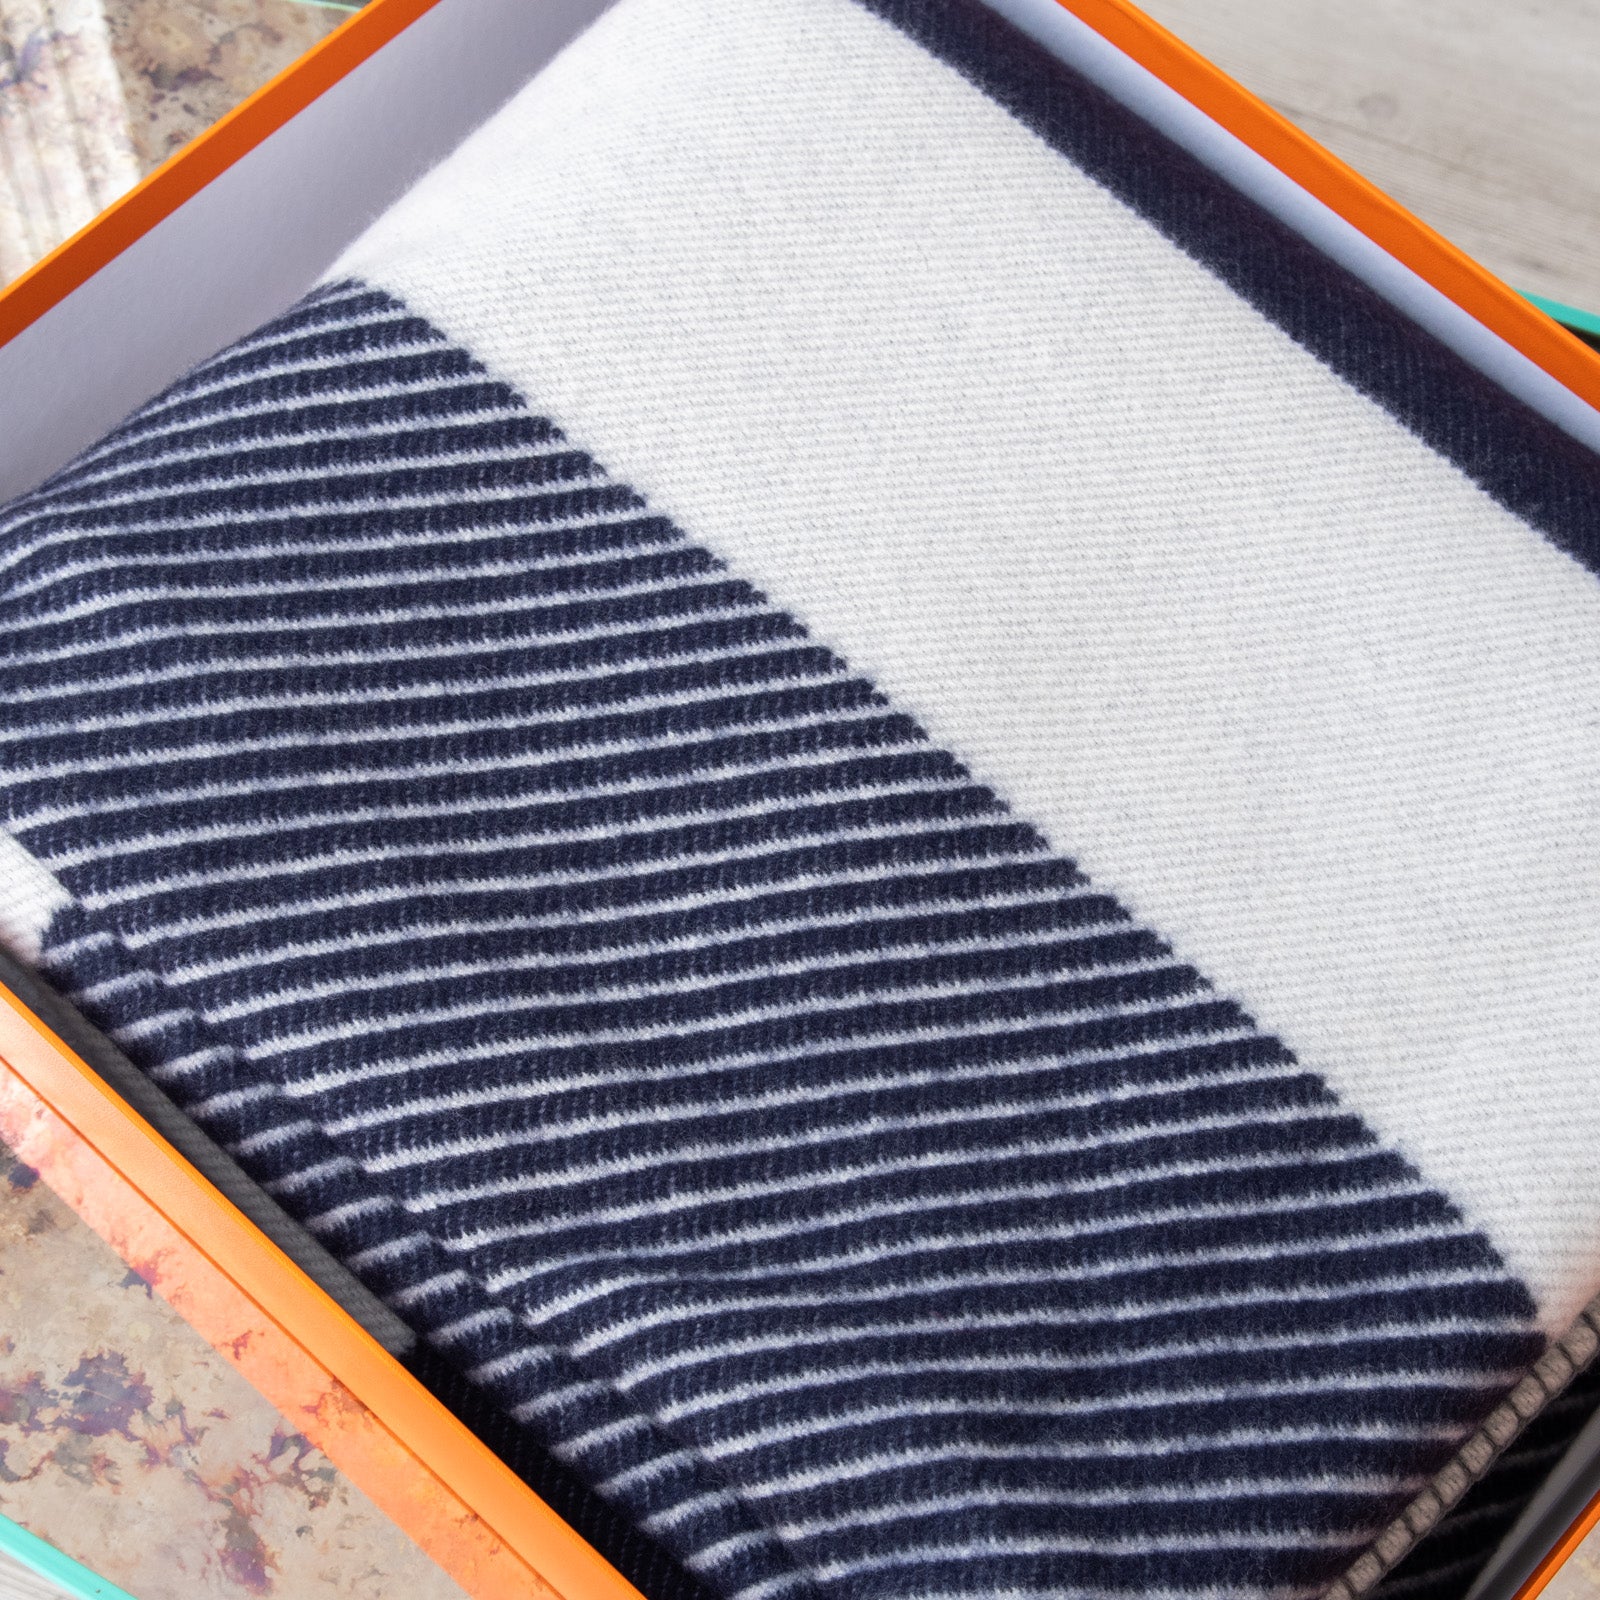 Hermes Navy And Grey Avalon Throw Blanket - Image 5 of 7